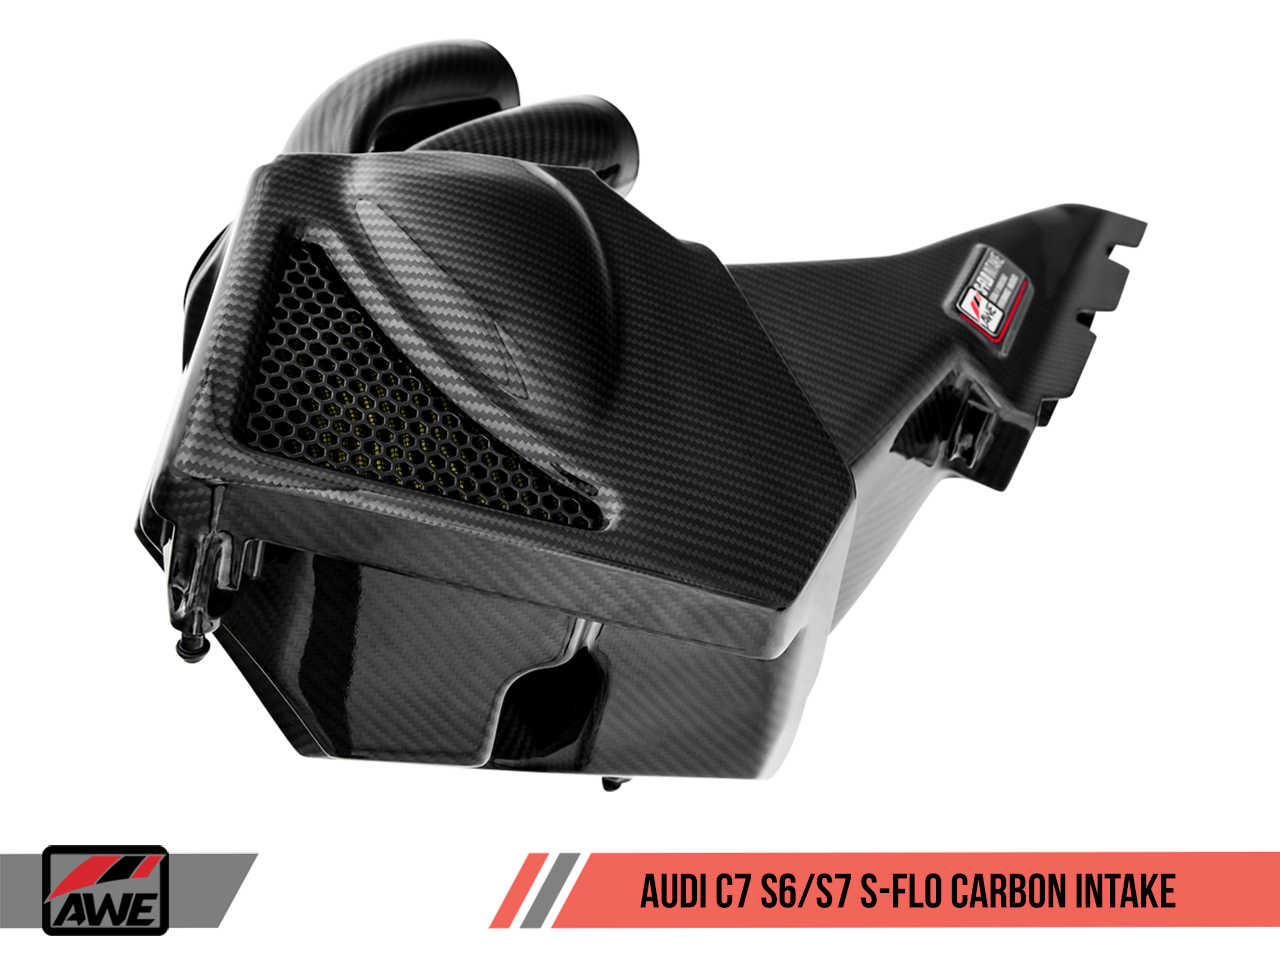 AWE S-FLO Carbon Intake for C7 S6 & S7